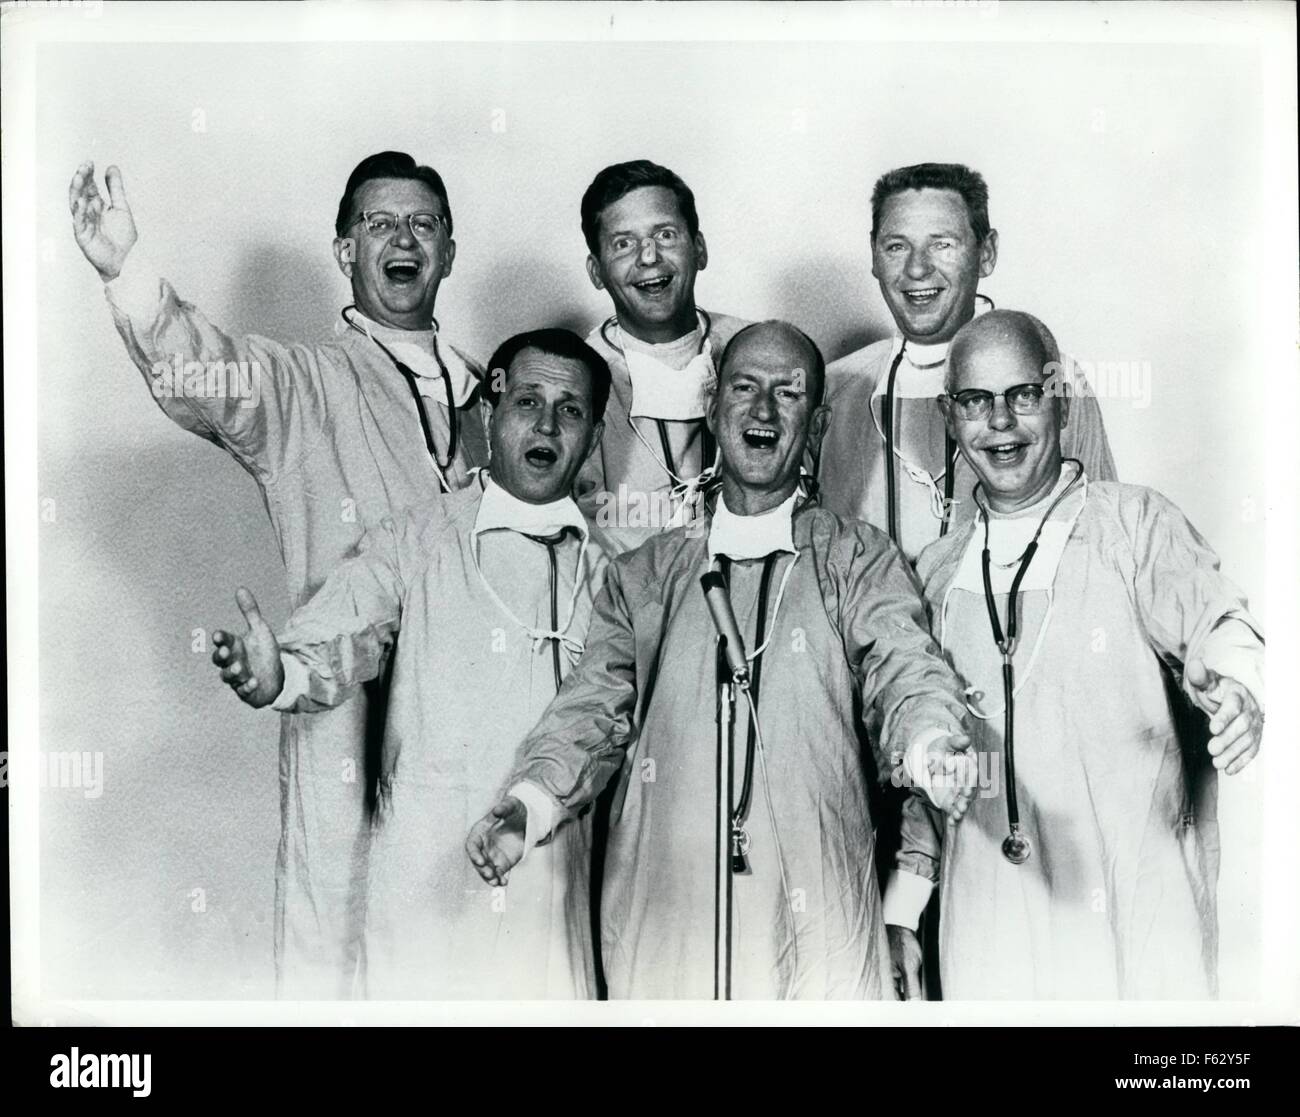 1962 - Six Springfield, Mo., physicians have made medical history - for better or for worse - in becoming the ''Singing Doctors'' of recording fame. Their new album, ''The Singing Doctors Keep You in Stitches, '' is available via the Greene County Medical Society, c/o The Singing Doctor's Student Foundation, 208 Professional Building, Springfield, Mo. 65806, at .95 per copy. From left to right the group includes internist Harold H. ''Happy'' Lurie, surgeons F.T. ''Ginger'' H'Doubler, Jr. (CQ), Charles E. Lockhart, James T. ''Jim'' Brown, Don F. Gose, and pathologist Fred C. Coller. (Credit Ima Stock Photo